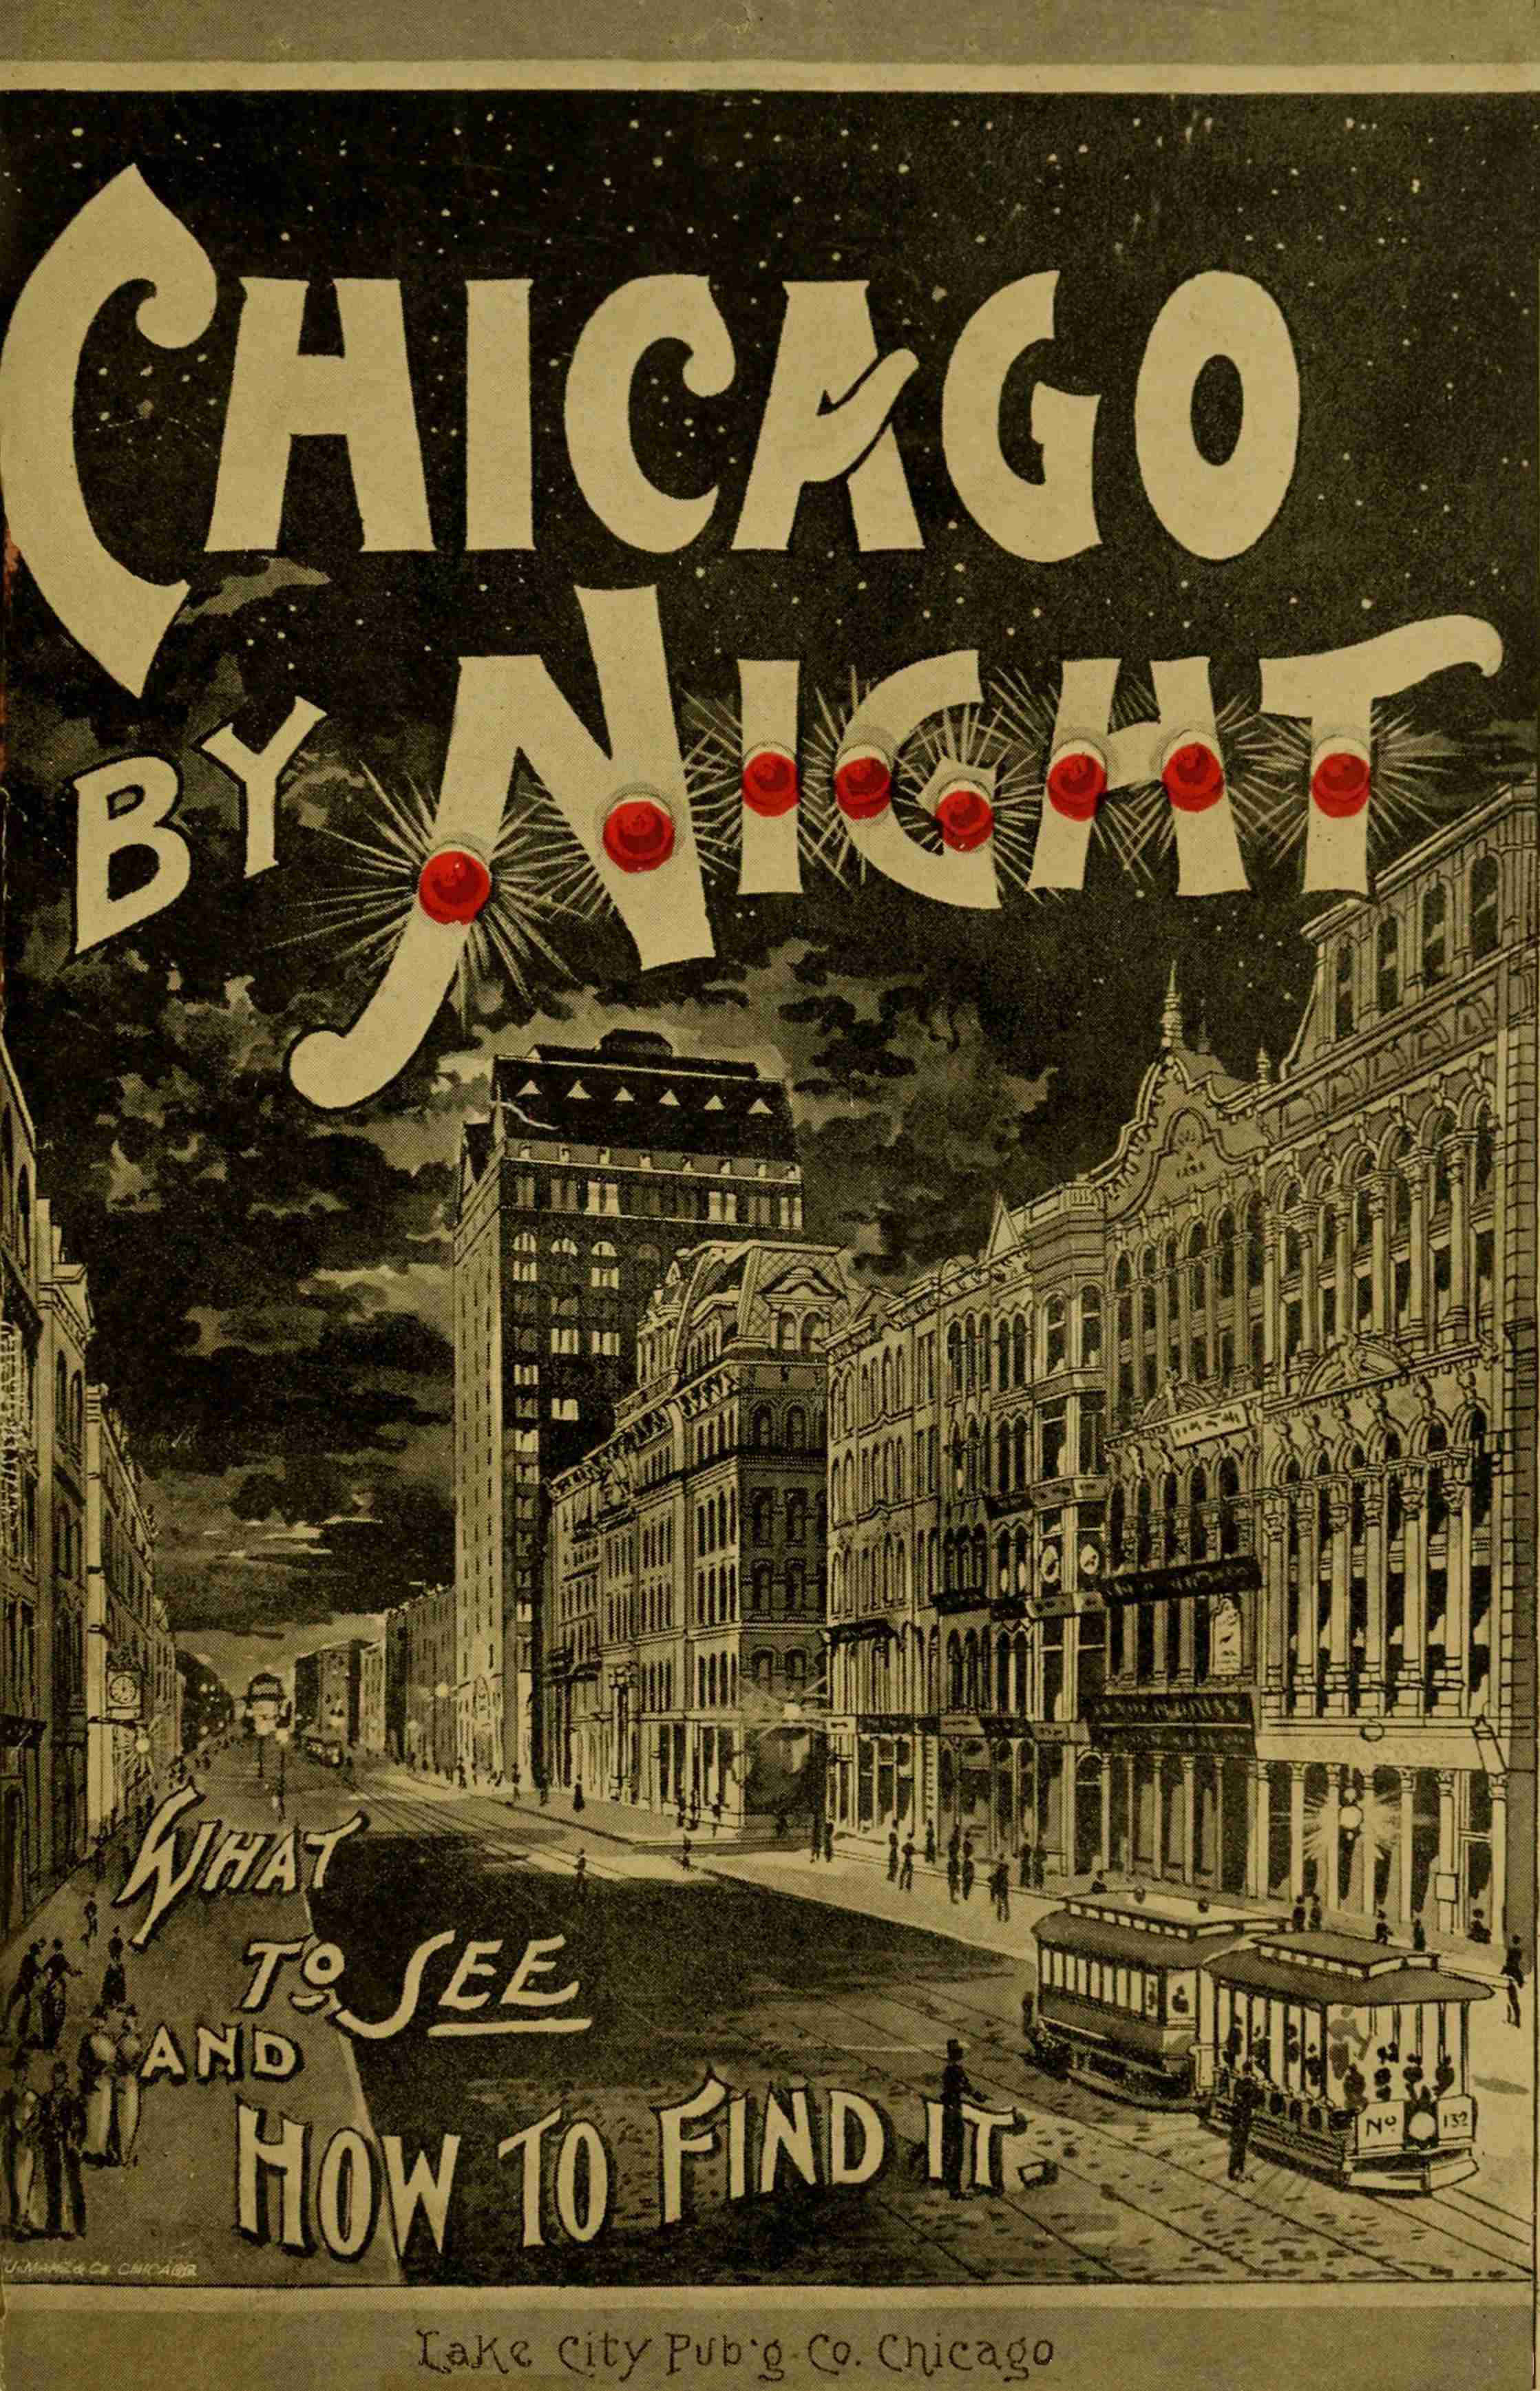 Chicago by Day and Night | Project Gutenberg